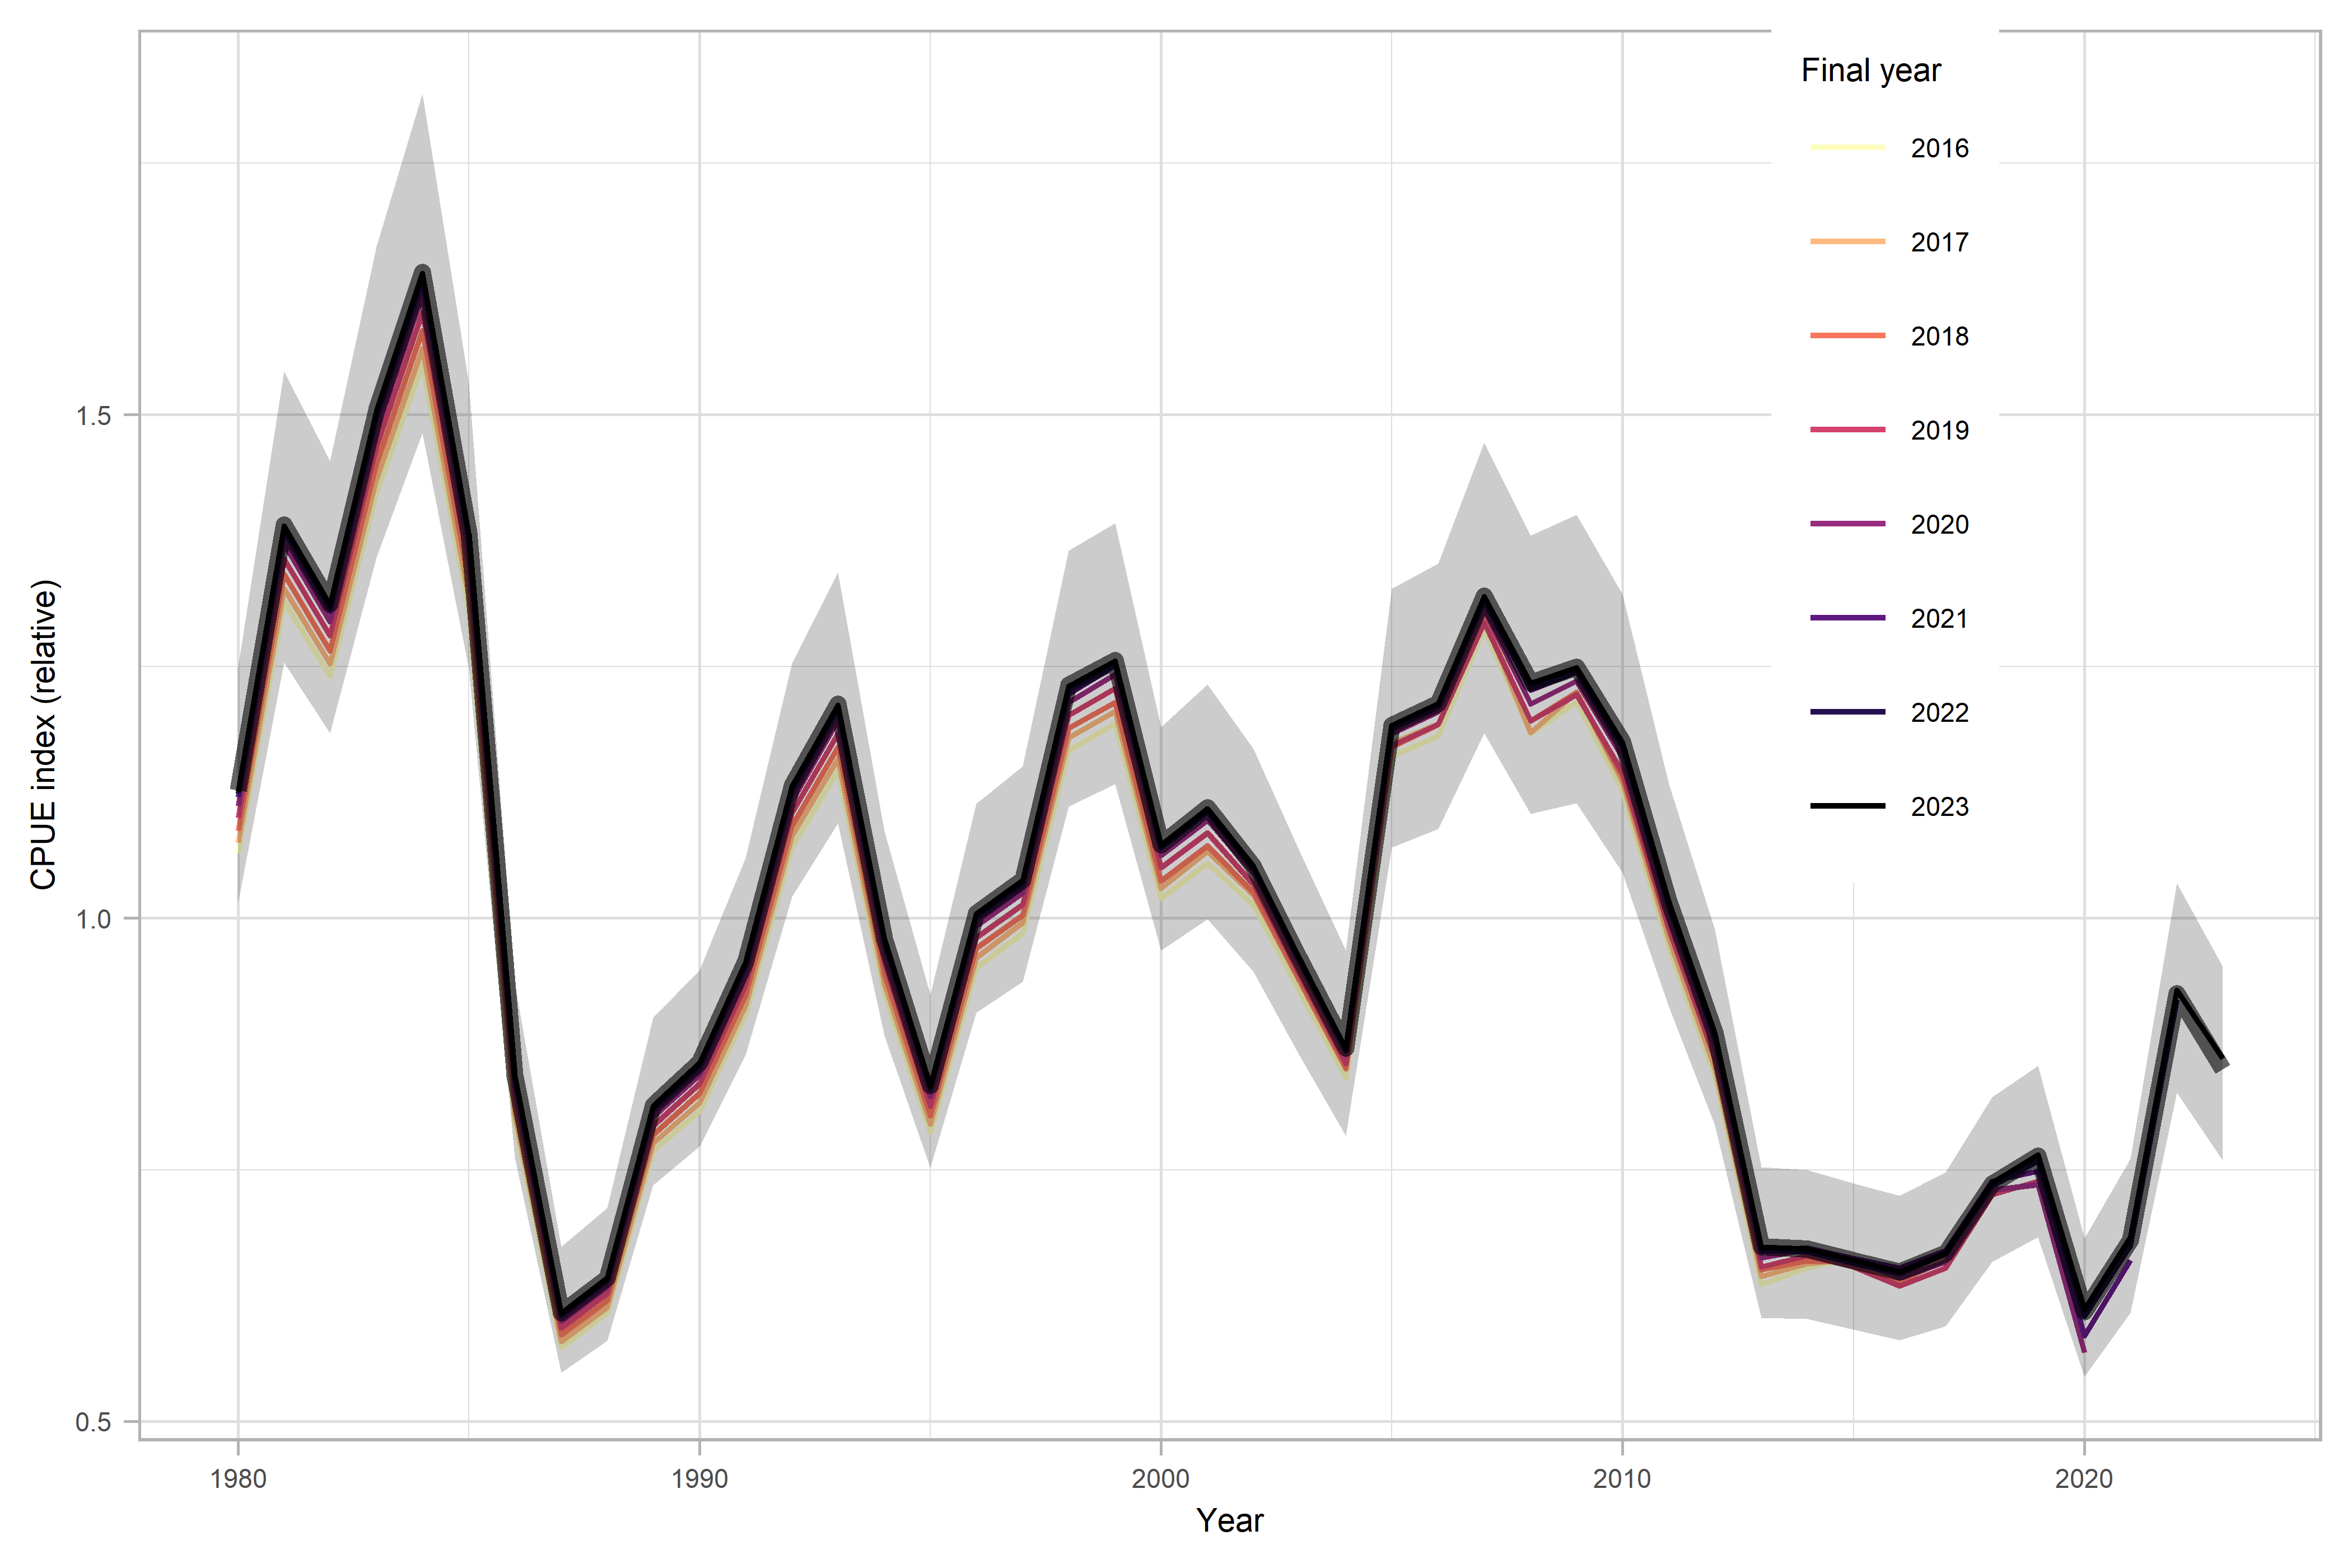 Figure 4: Standardized CPUE index based on Norwegian data. The solid black line shows the index used in the current assessment, and colored lines retrospective indices with data restricted to January-October in the final year, peeling off years back to 2016. Index values are centered around the mean of the series. The shaded area marks the 95% confidence intervals. Indices were standardized using a GAMM implemented in glmmTMB.